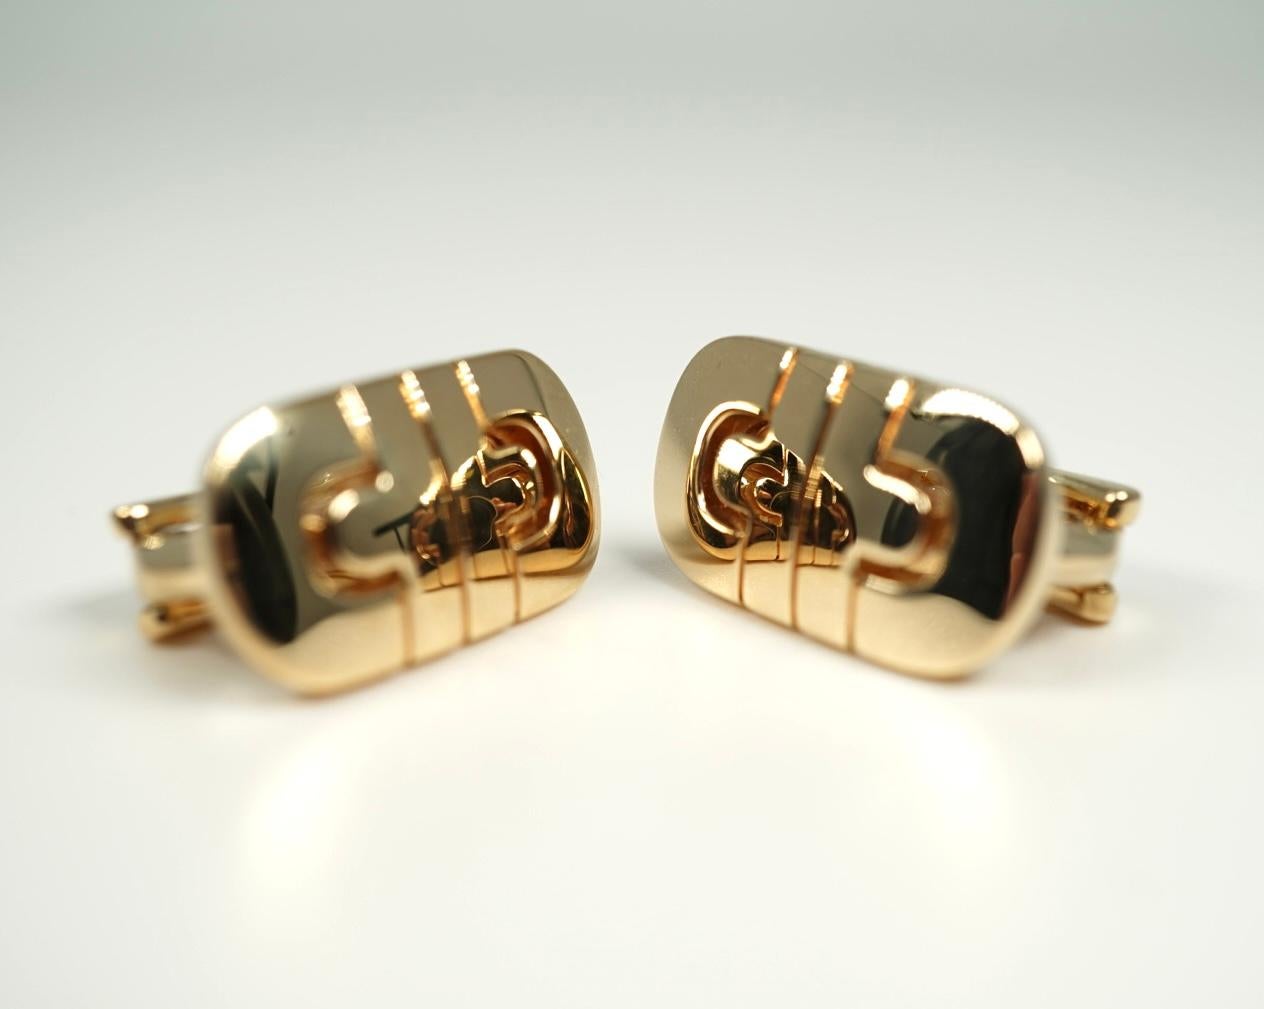 From the Parentesi Line, these yellow gold earrings by iconic designer Bvlgari are lovely!